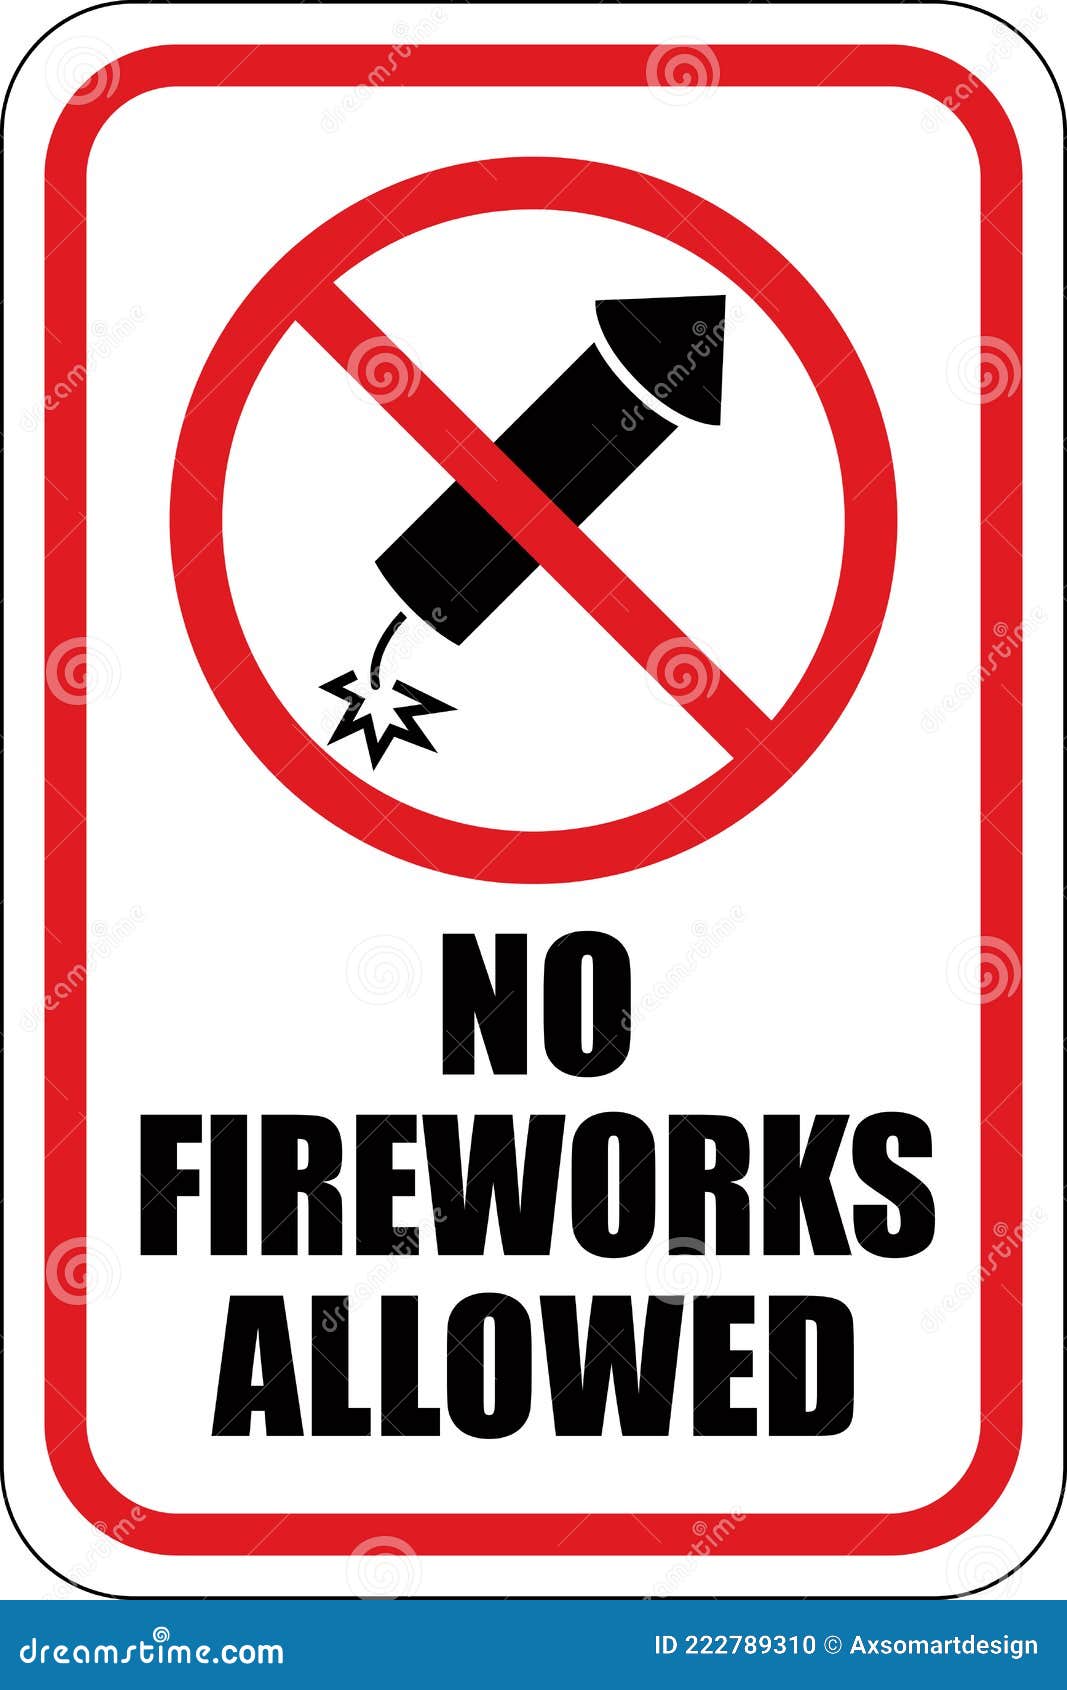 no fireworks allowed sign | notice for cities, parks and fire prone areas | explosive devices prohibited